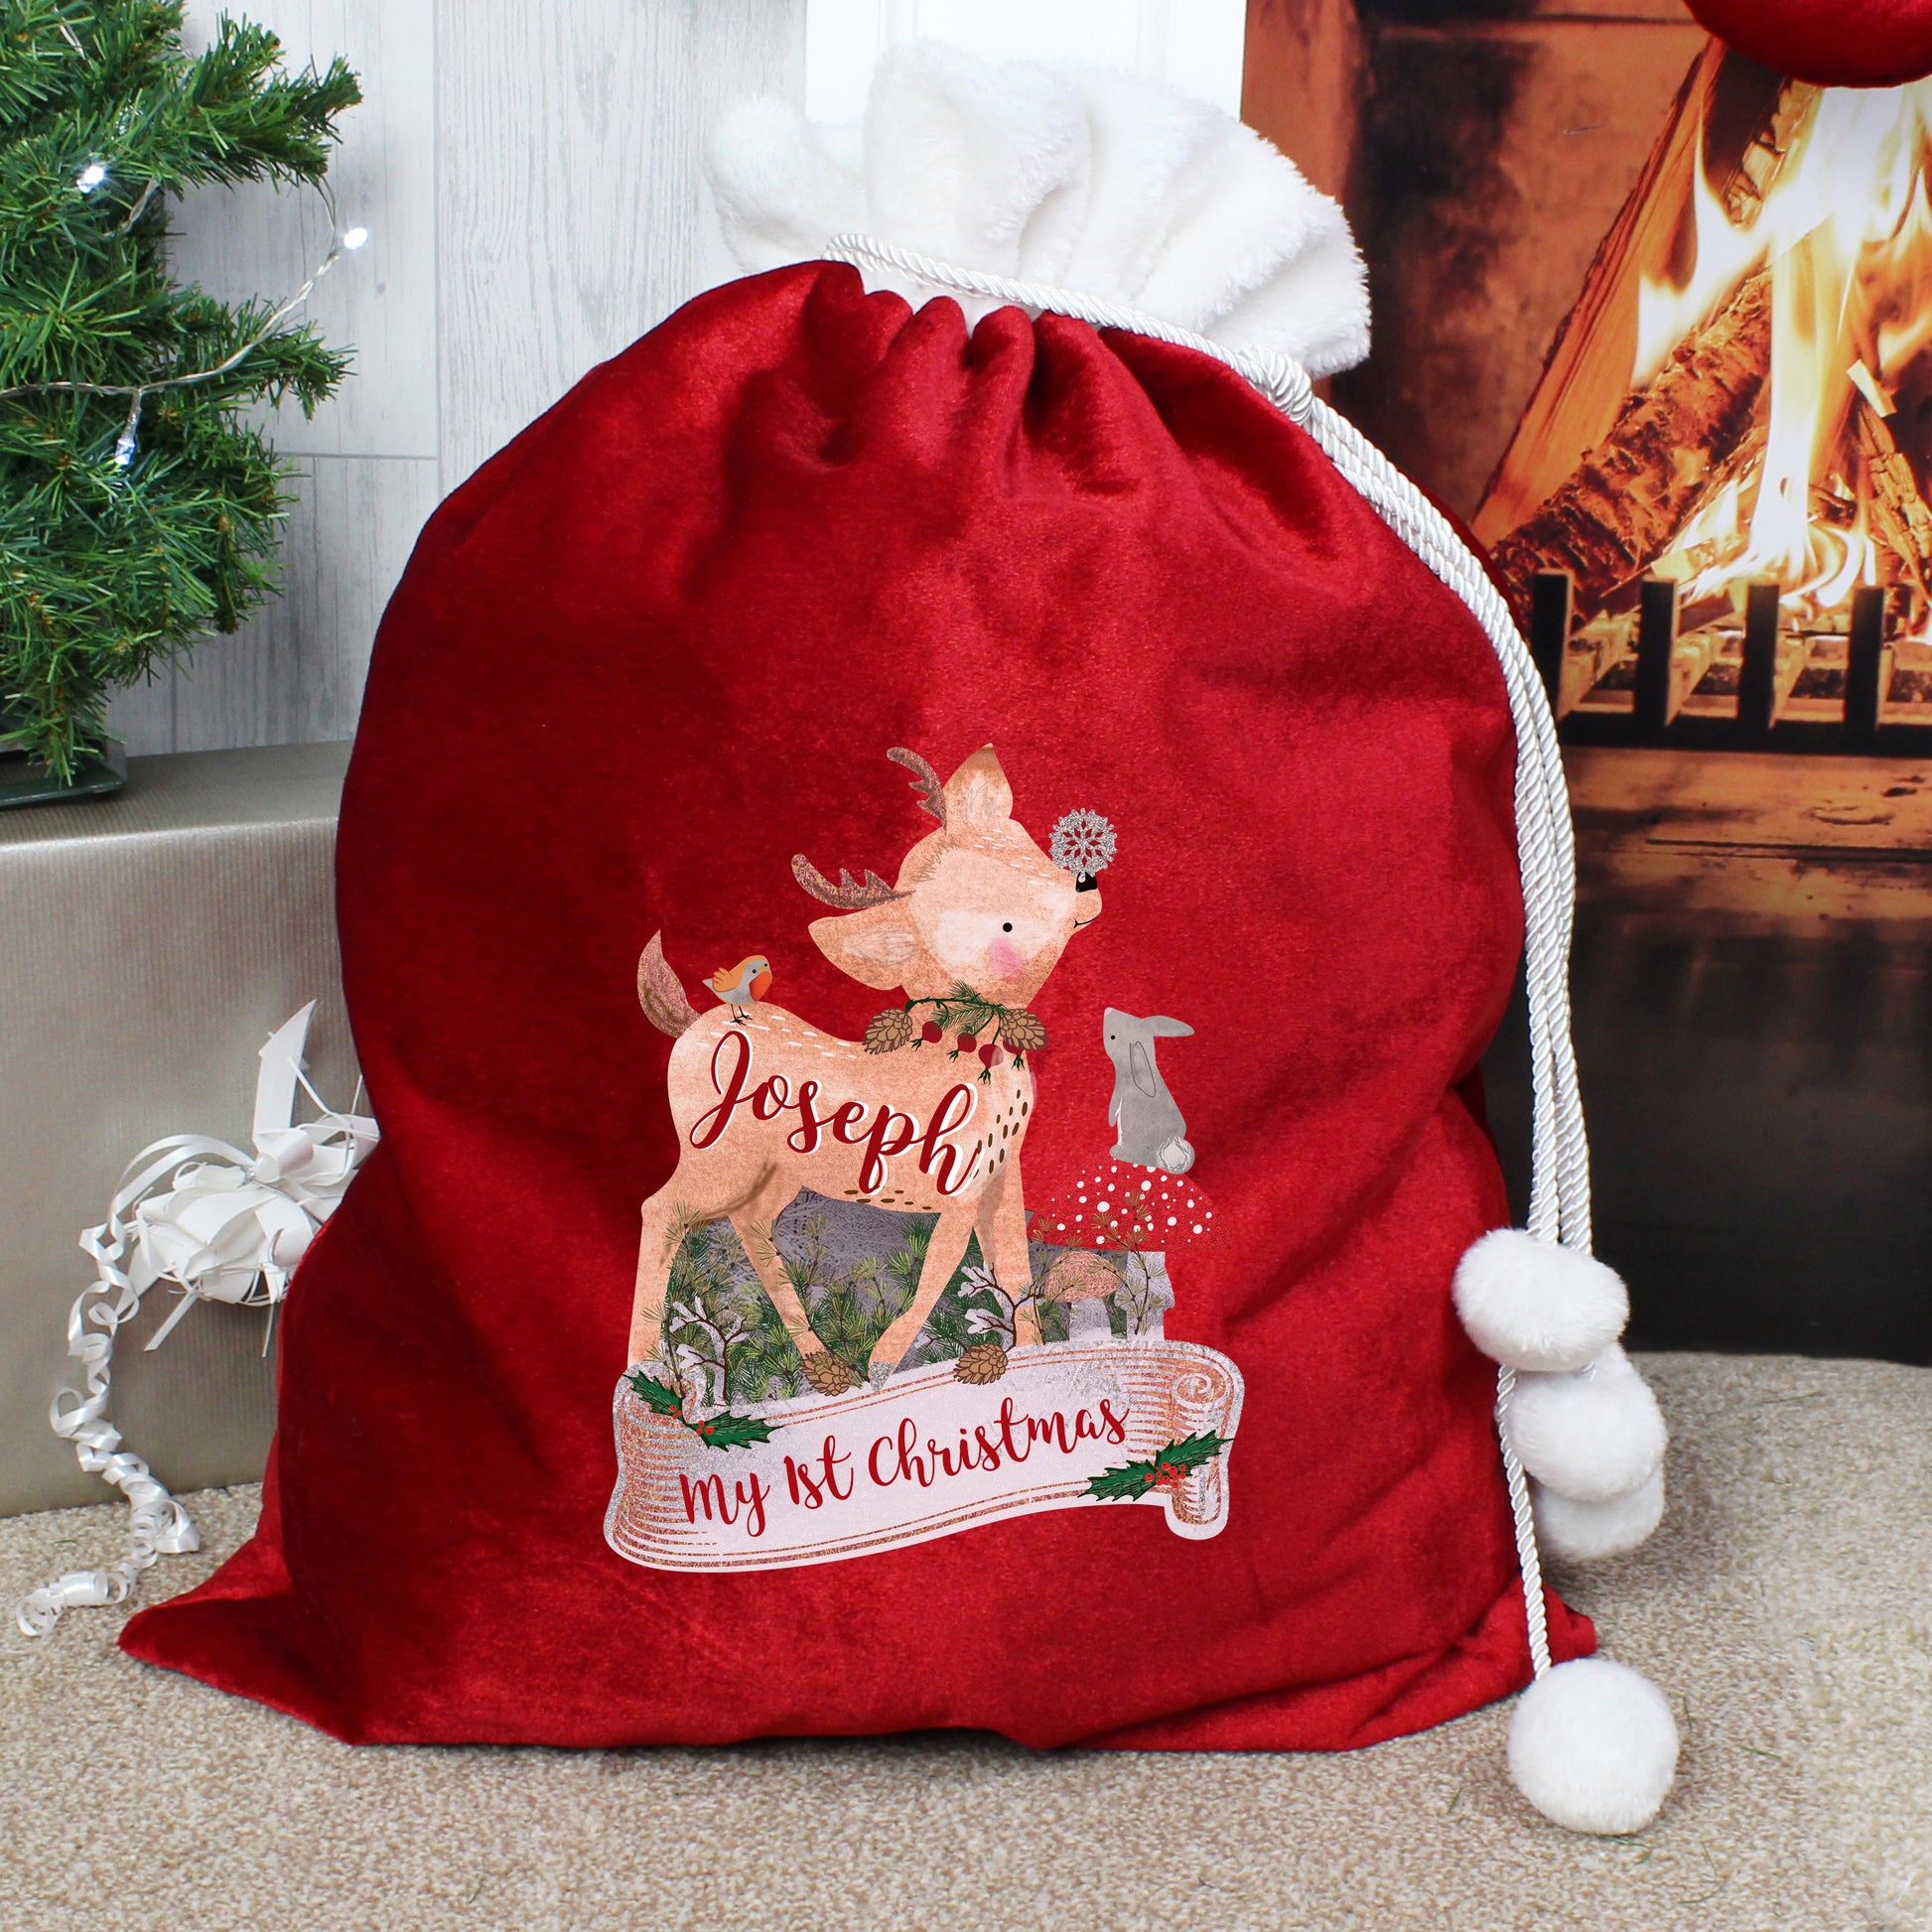 Retro fawn luxury red sack personalised - Lilybet loves